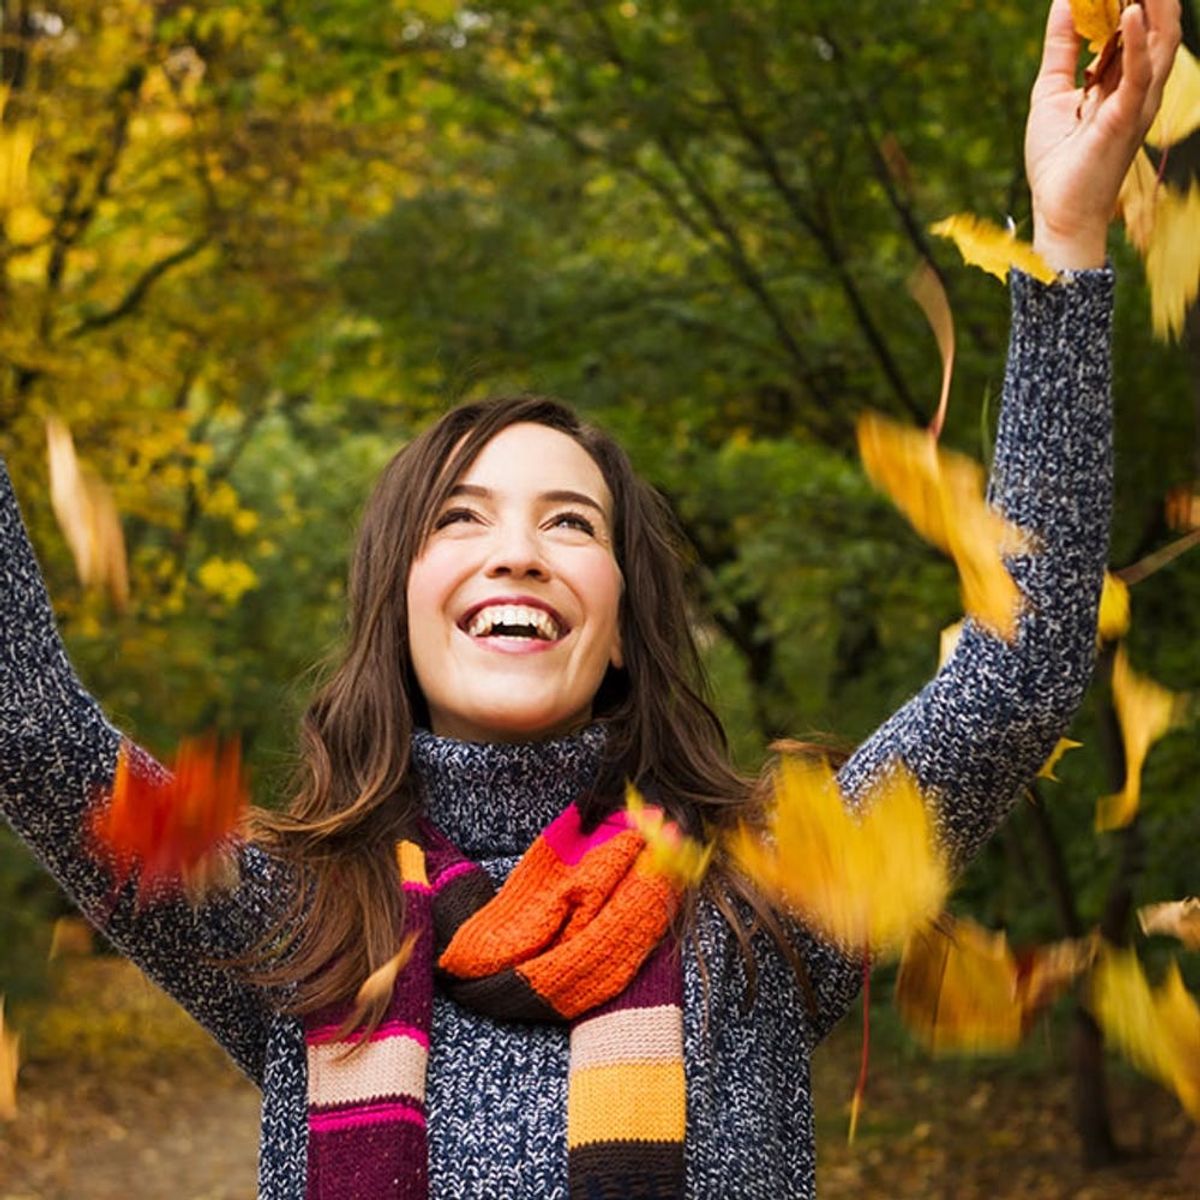 There’s a Scientific Reason Why We Love Fall